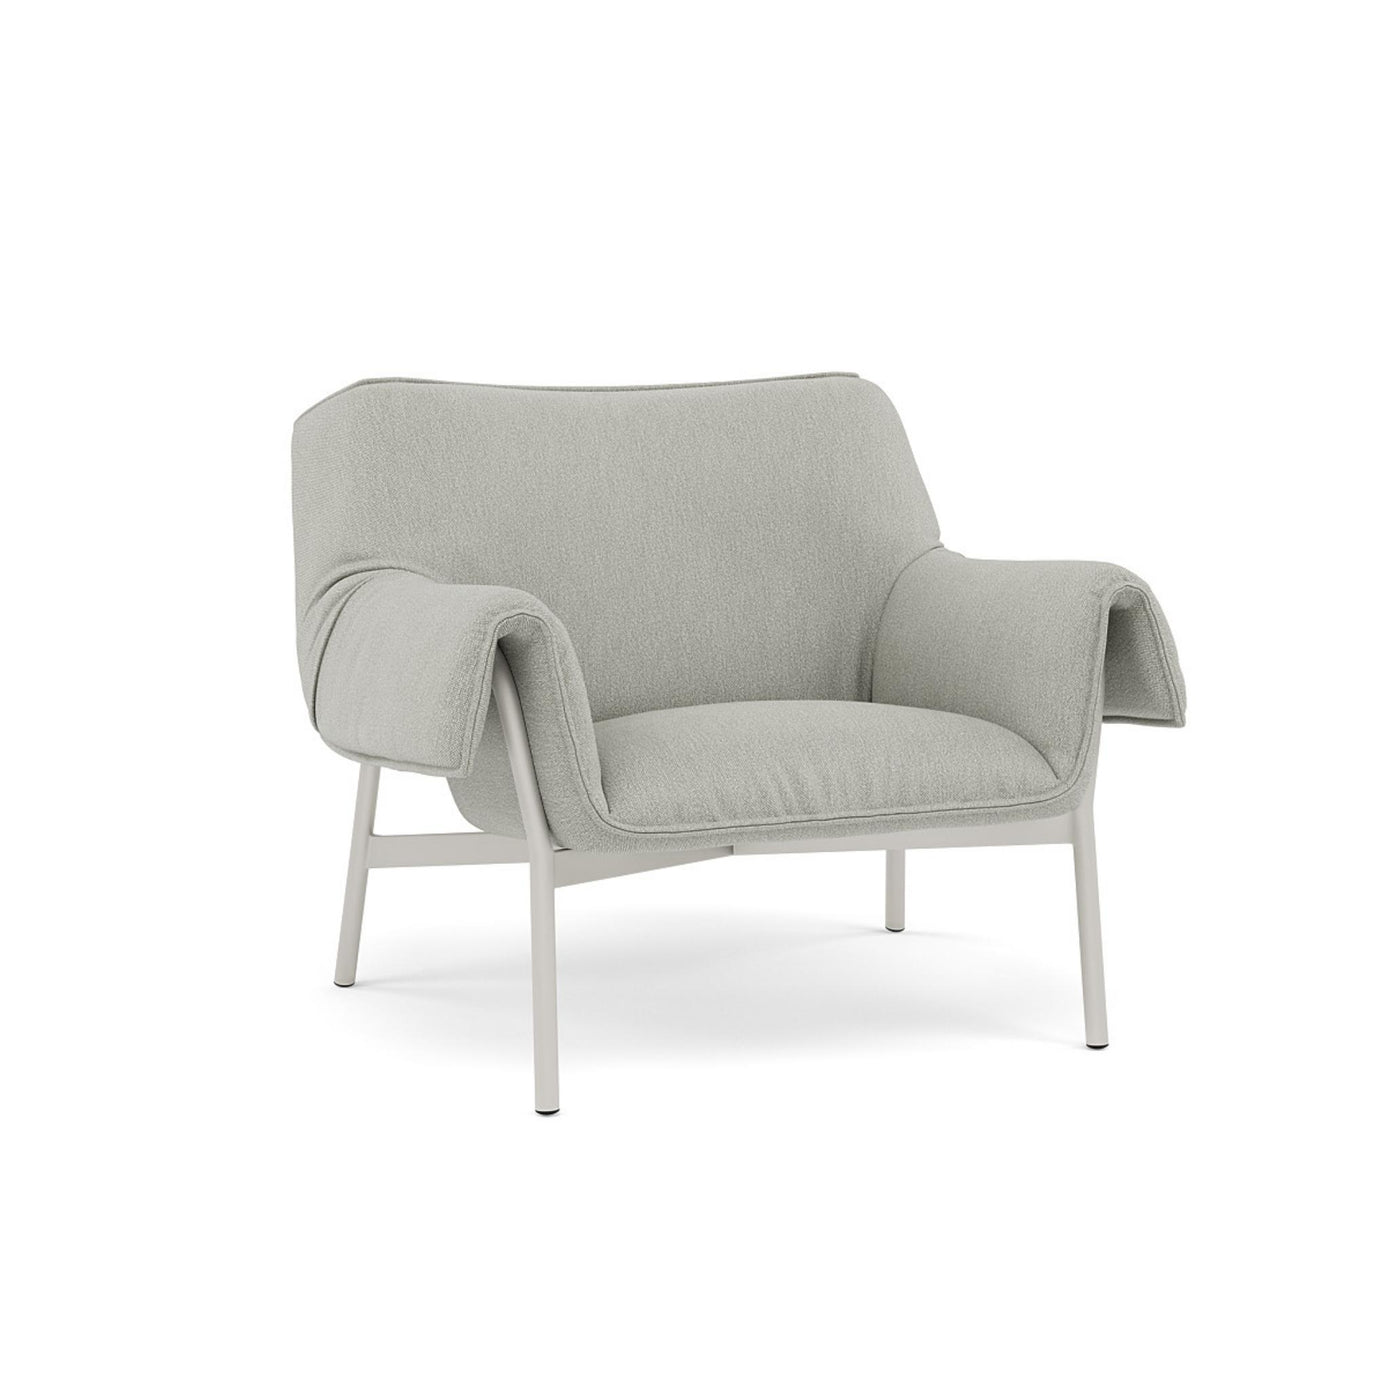 Muuto Wrap Lounge Chair. Made to order from someday designs. #colour_clay-12